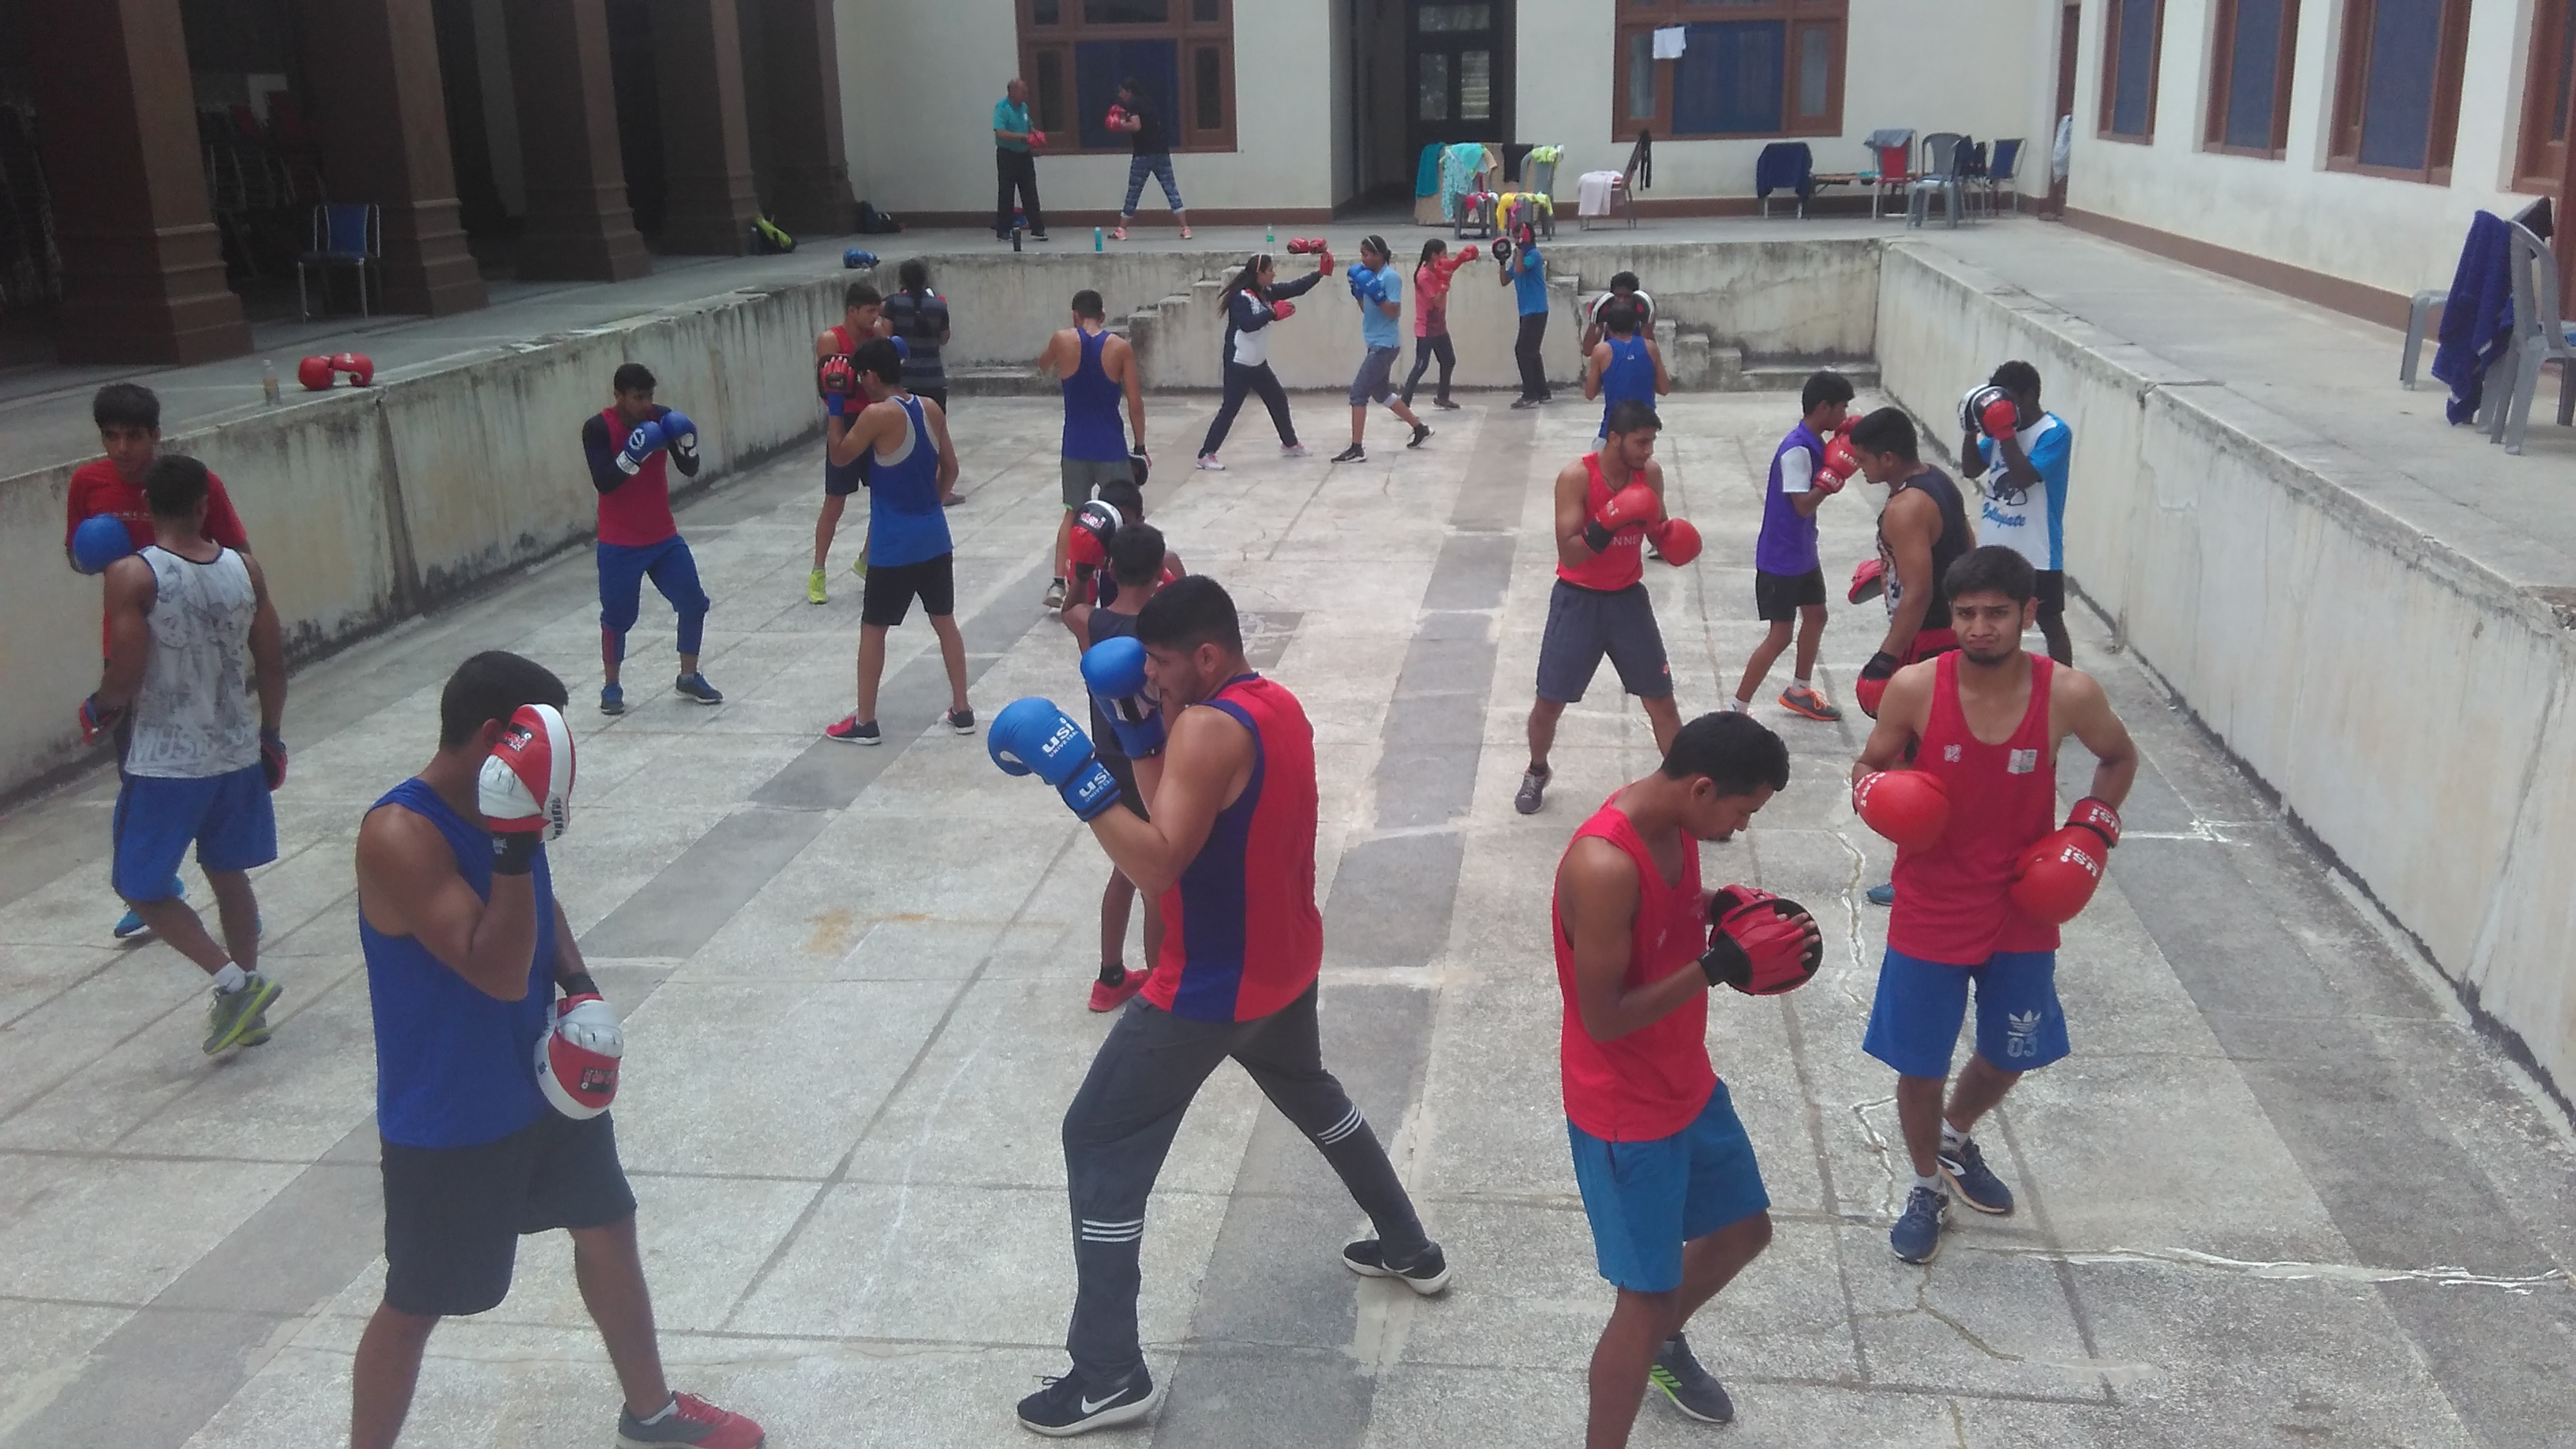 Sports Authority of India National Boxing Academy Rohtak's Trainees During Their Practice Session In IHH Sadhupul